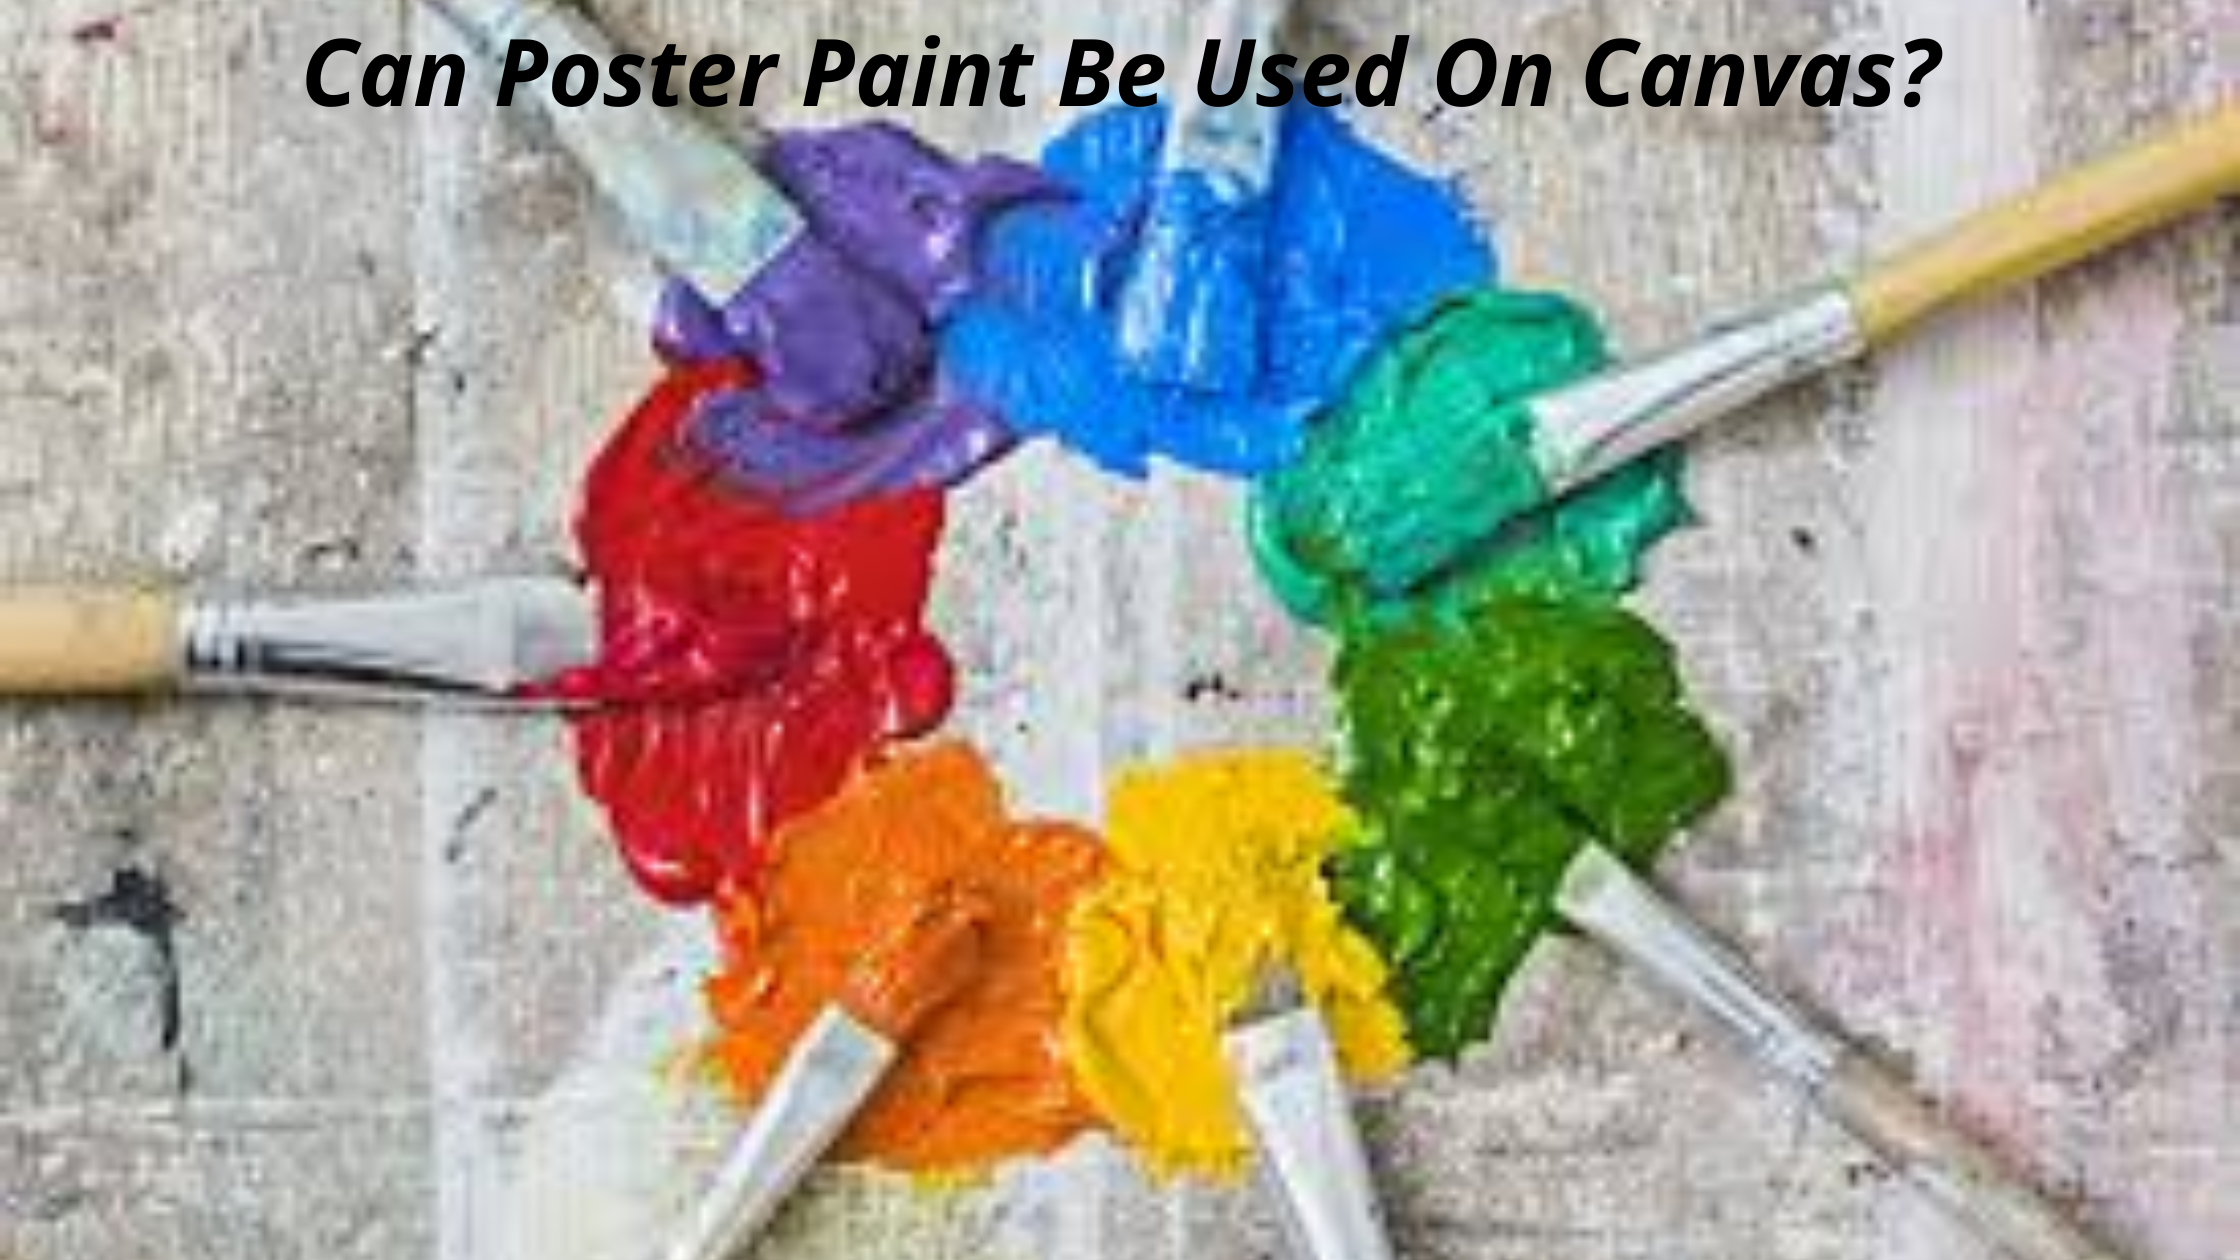 Can Poster Paint Be Used On Canvas?